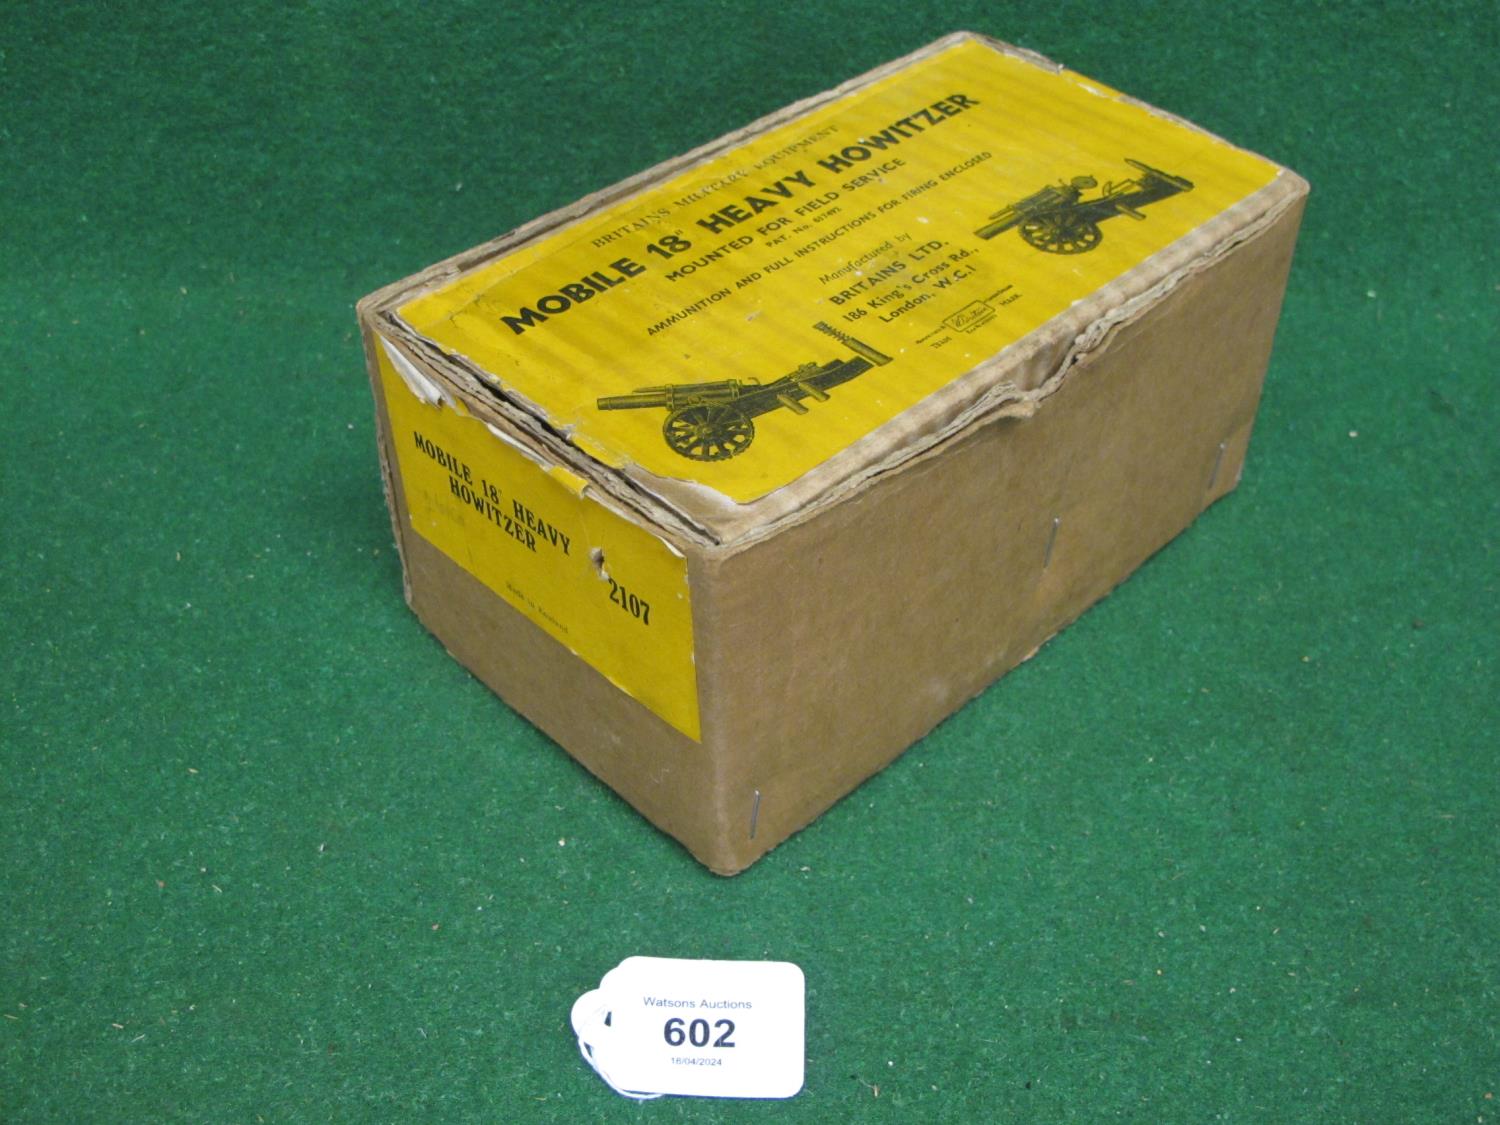 Britains Mobile 18 Heavy Howitzer with sprung cartridge and four metal shells, boxed Please note - Image 2 of 3